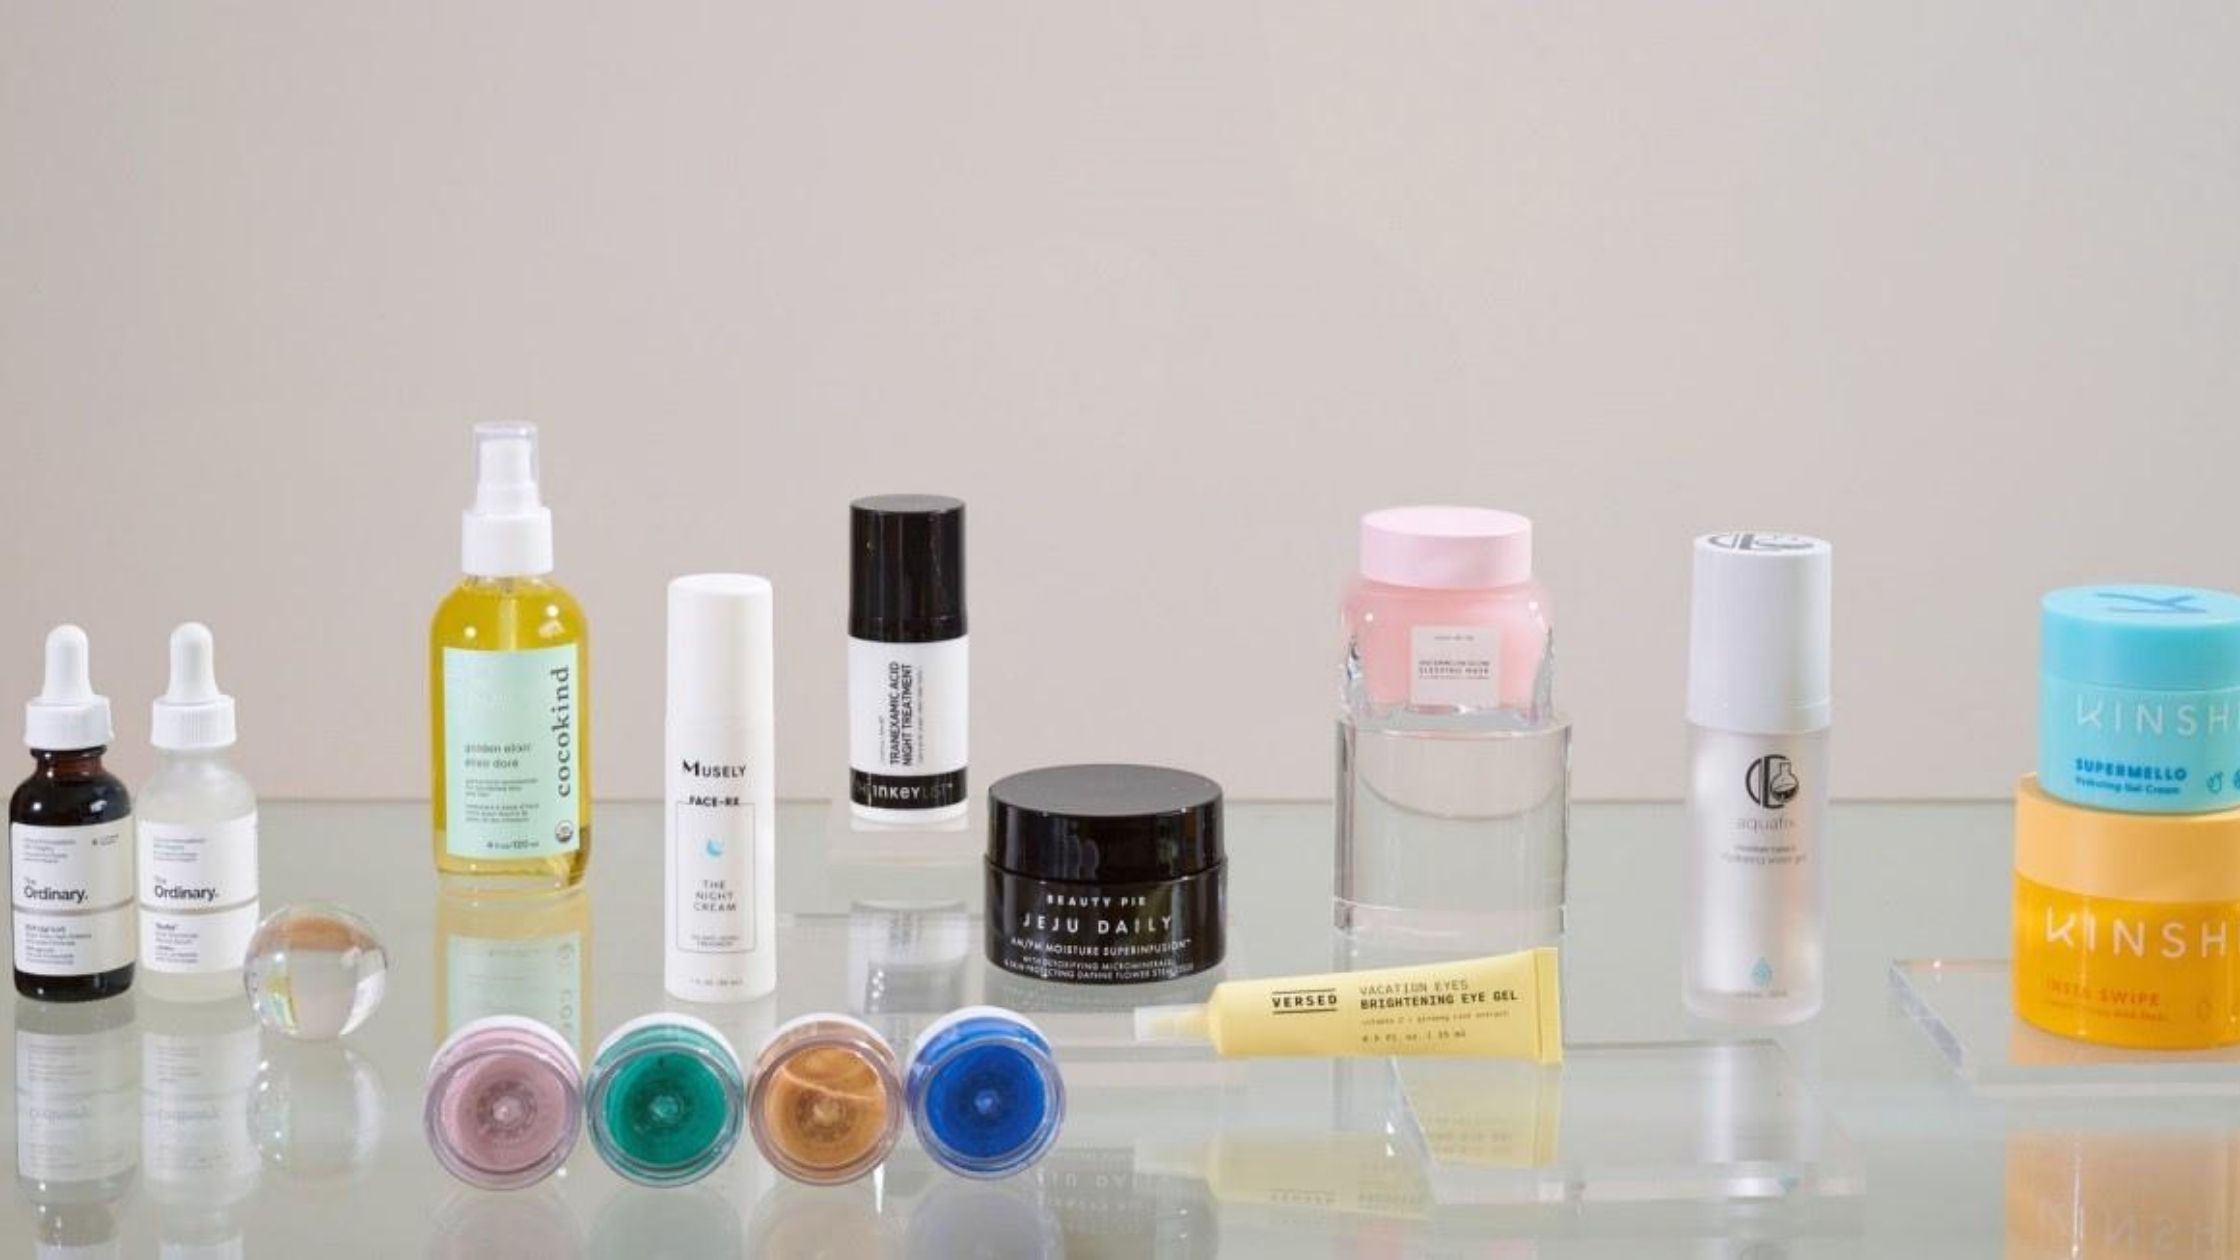 What are the most essential products in skin care set